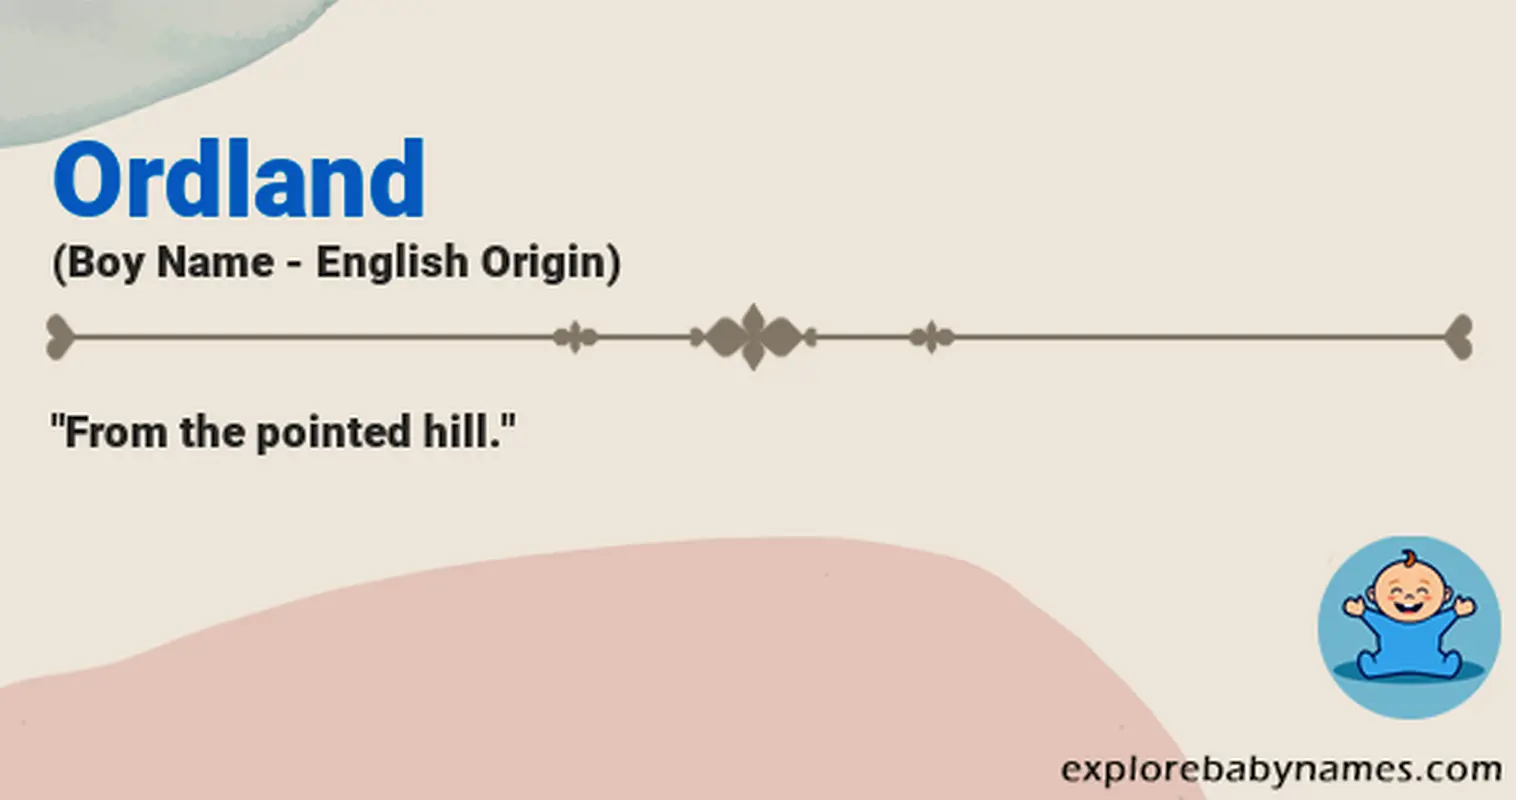 Meaning of Ordland